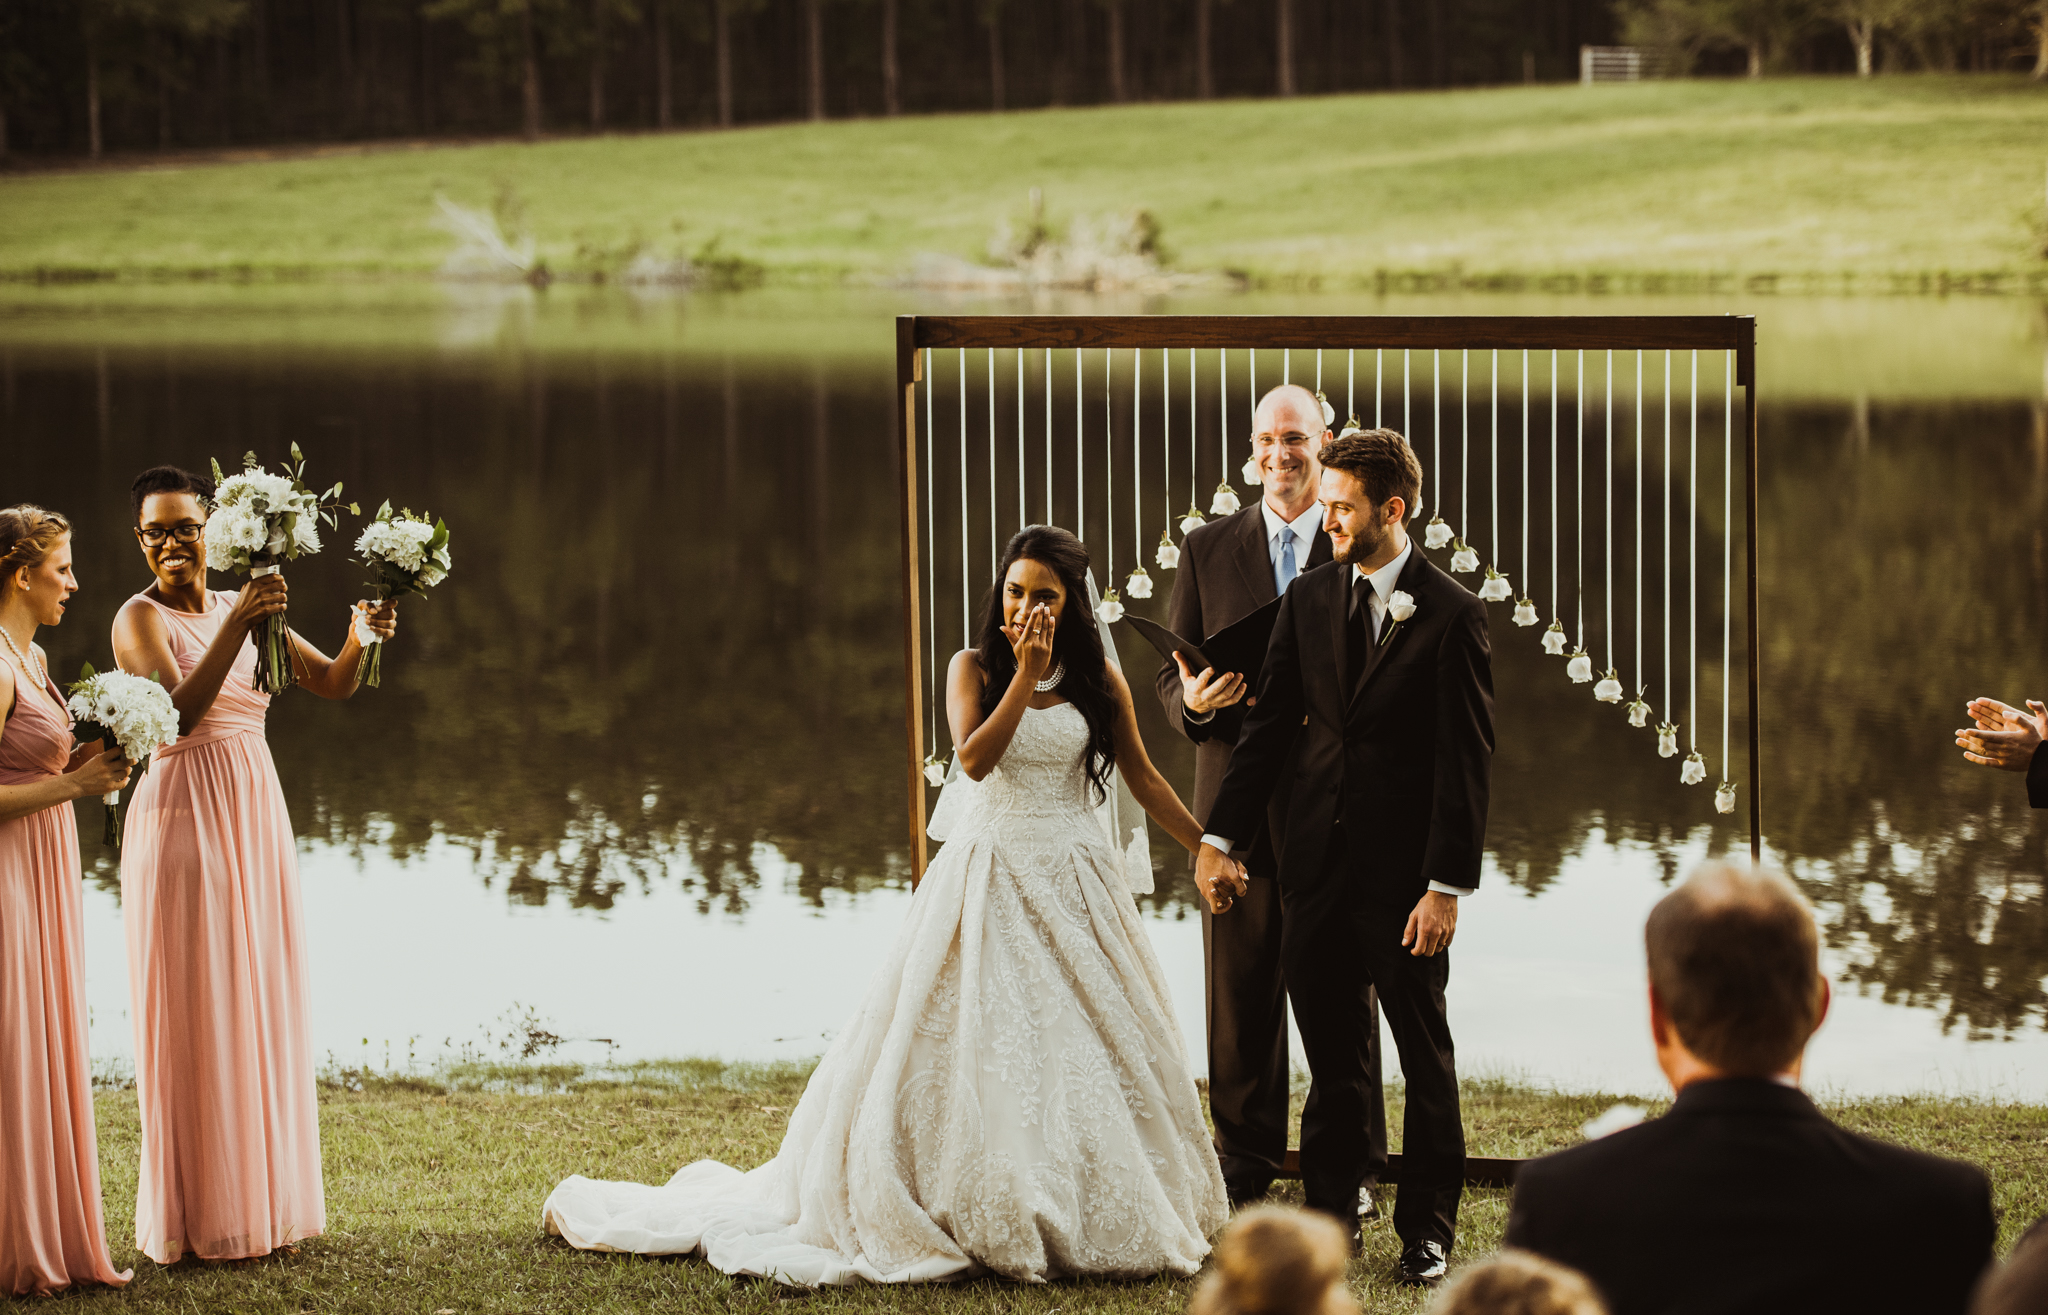 ©Isaiah & Taylor Photography - Lakeside Barn Wedding, Private Estate, Poplarville Mississippi-79.jpg